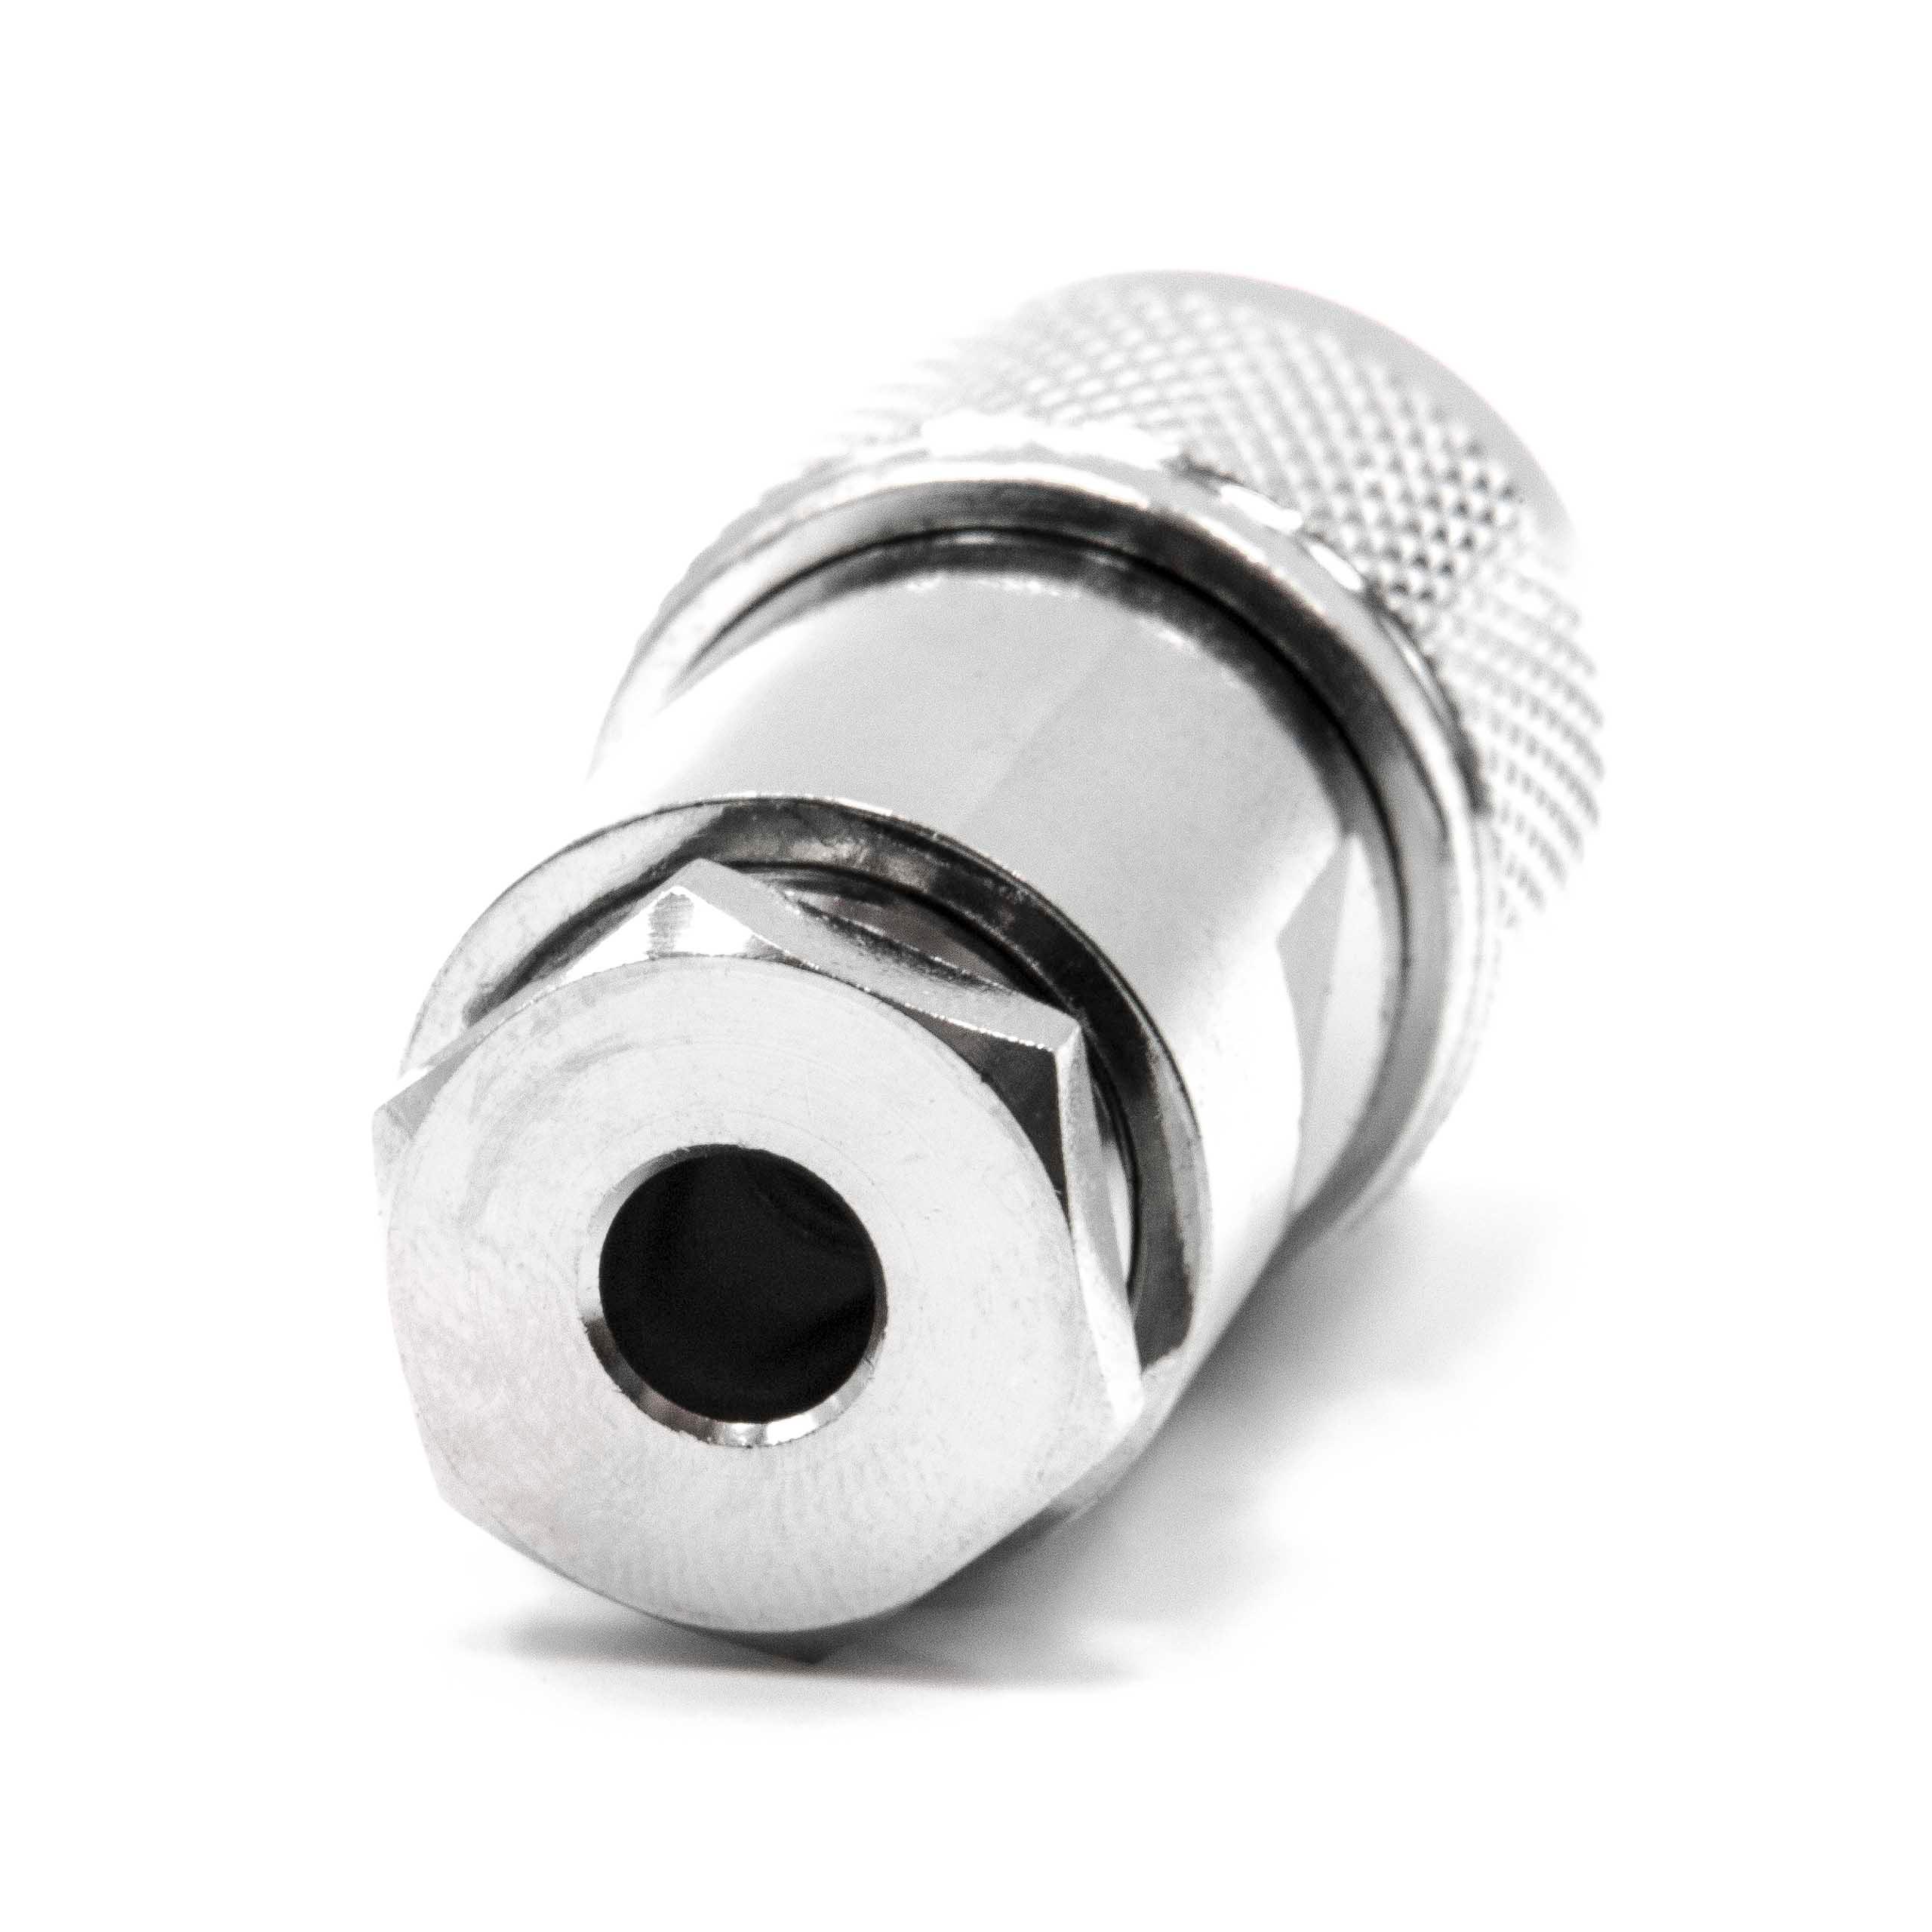 N Connector Suitable for Coaxial Cable - Coaxial Connector for GPS & WiFi Devices, Antennae